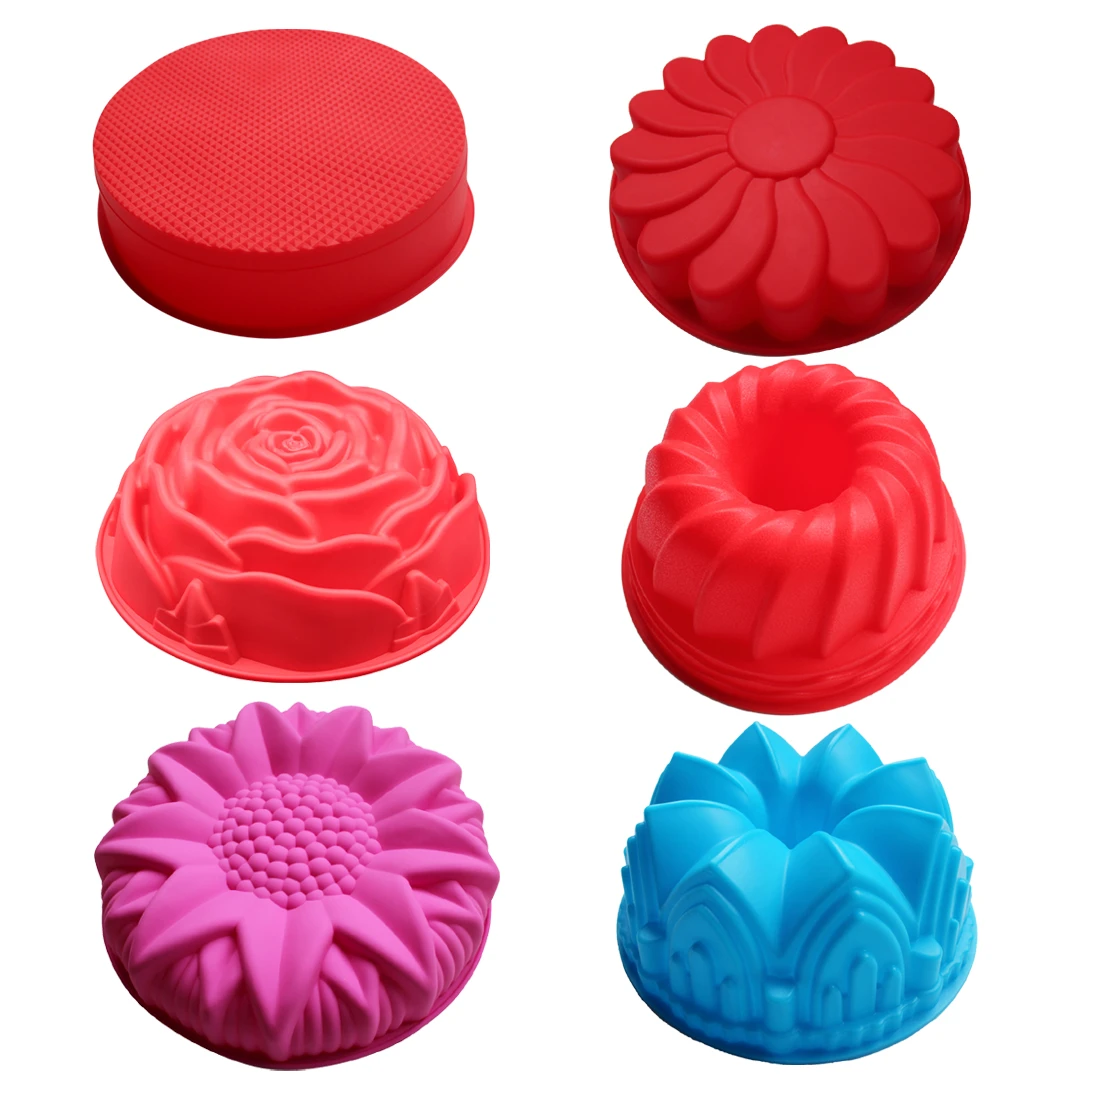 DIY Silicone Cake Mold SCM-003-3 Pastry Styling Sunflower Large Molds 